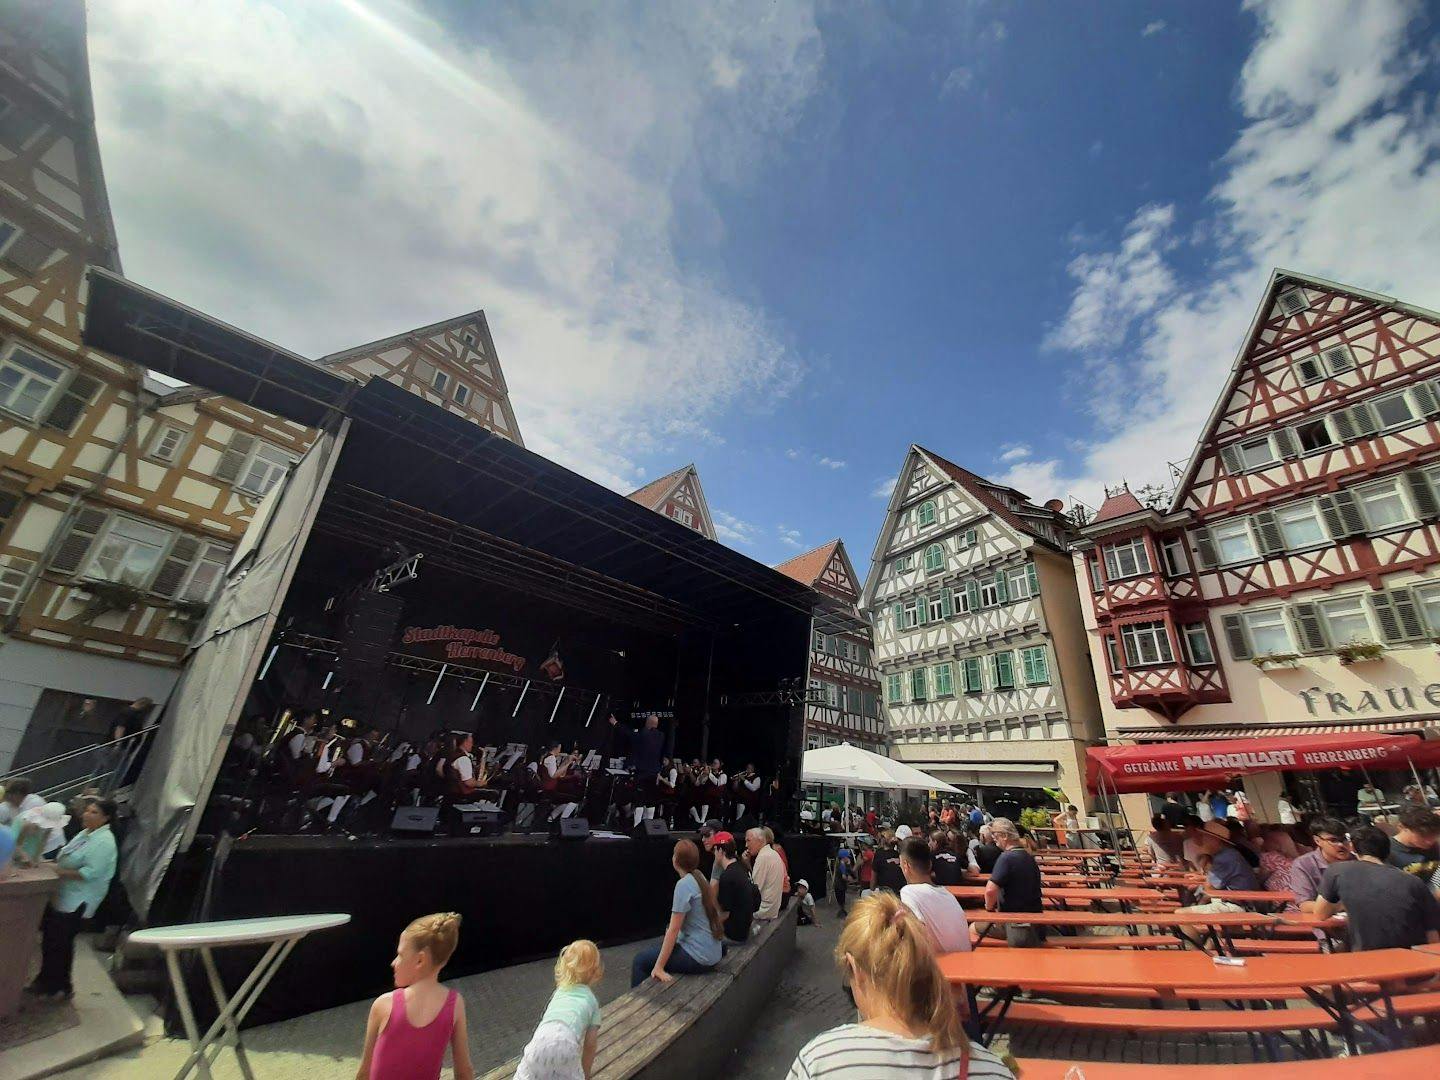 the stage at the festival in the town of colheim